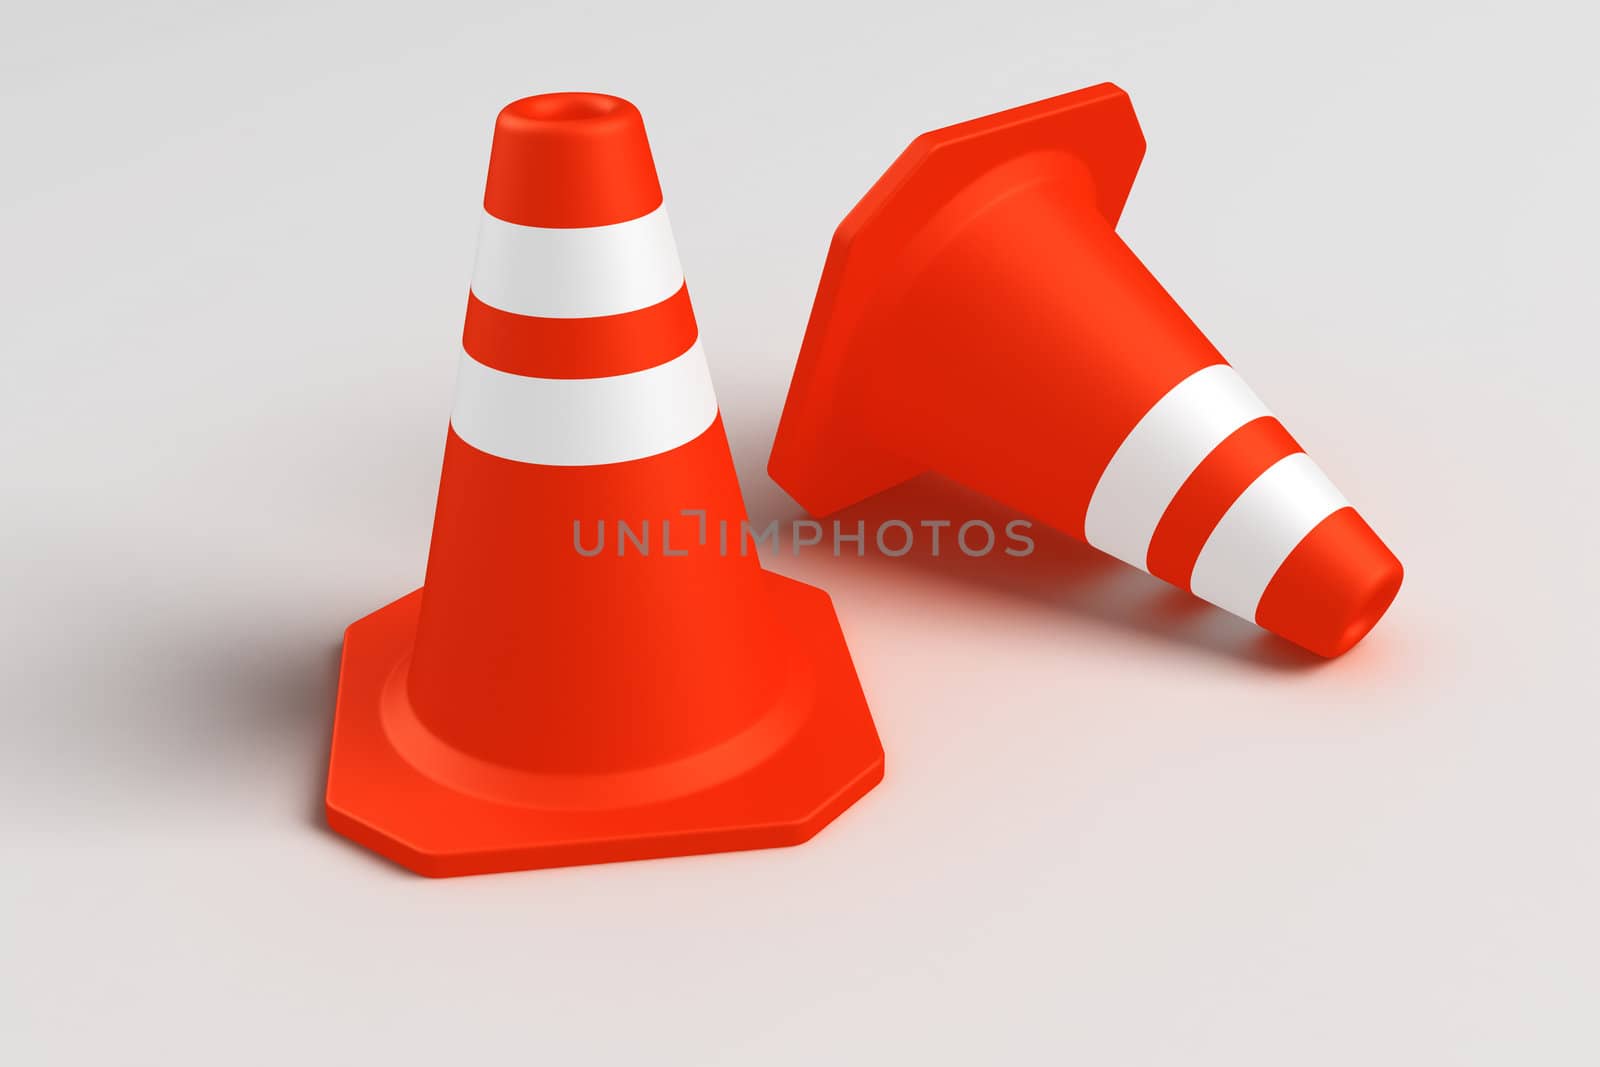 3d rendering of two traffic cones